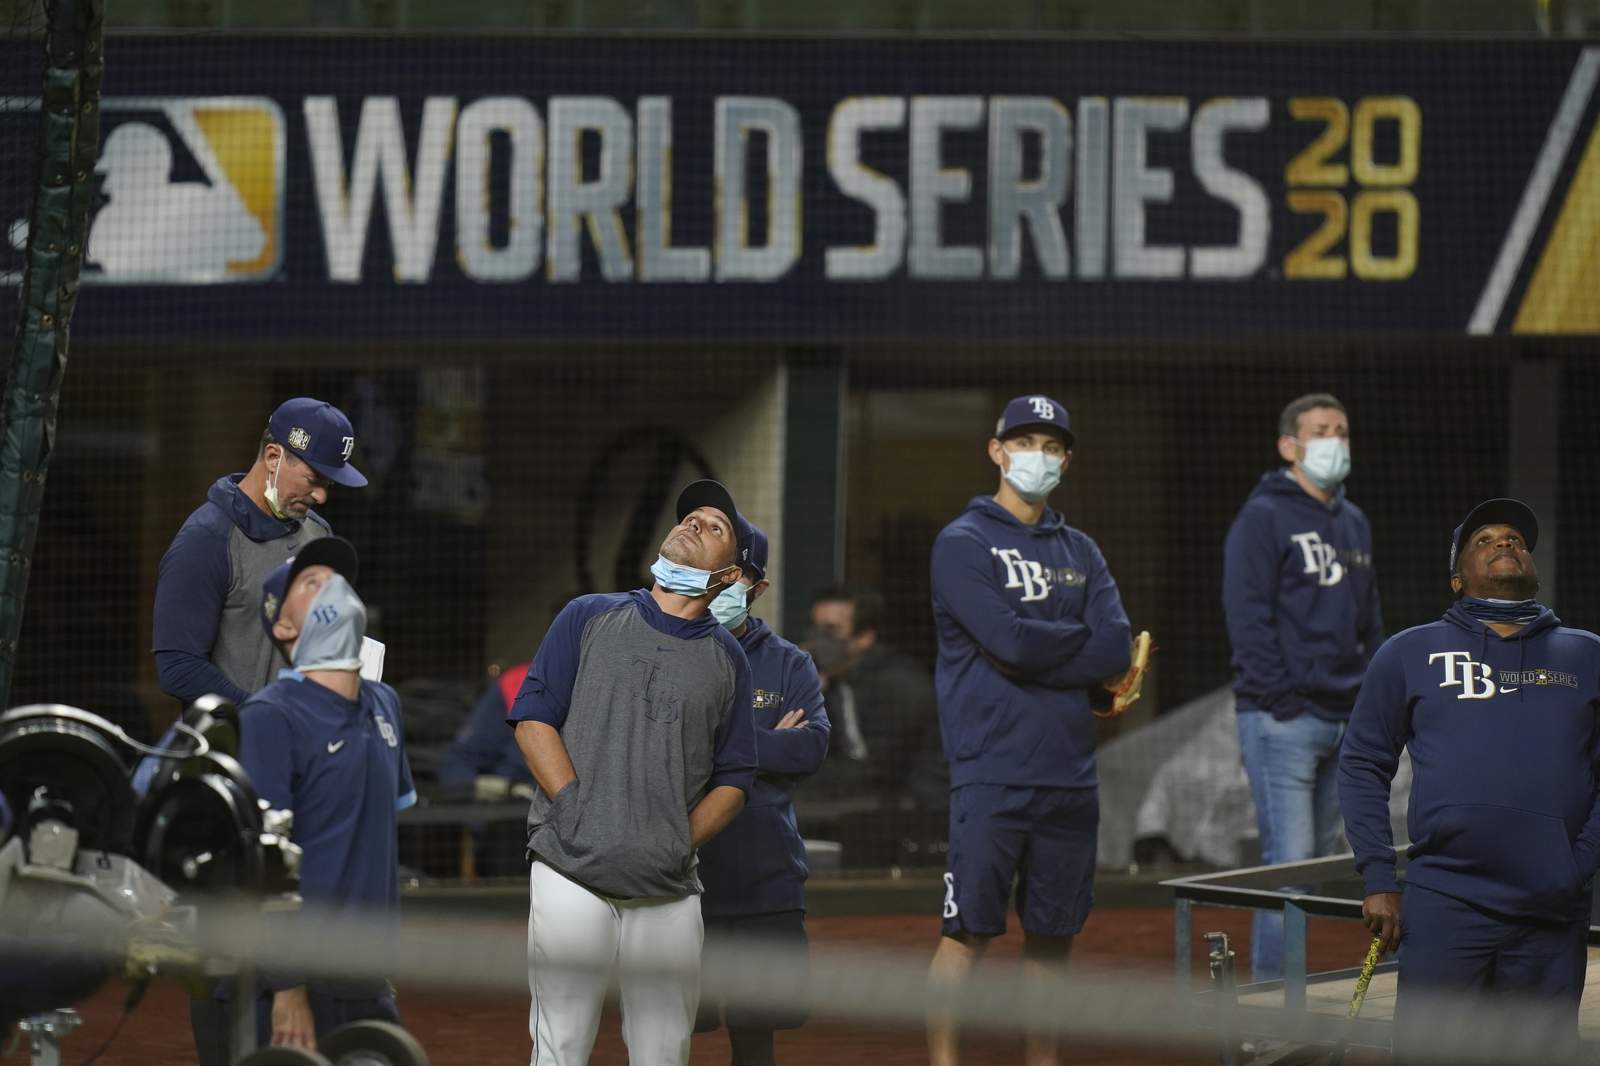 Few fans, masked umps, muted celebrations for World Series